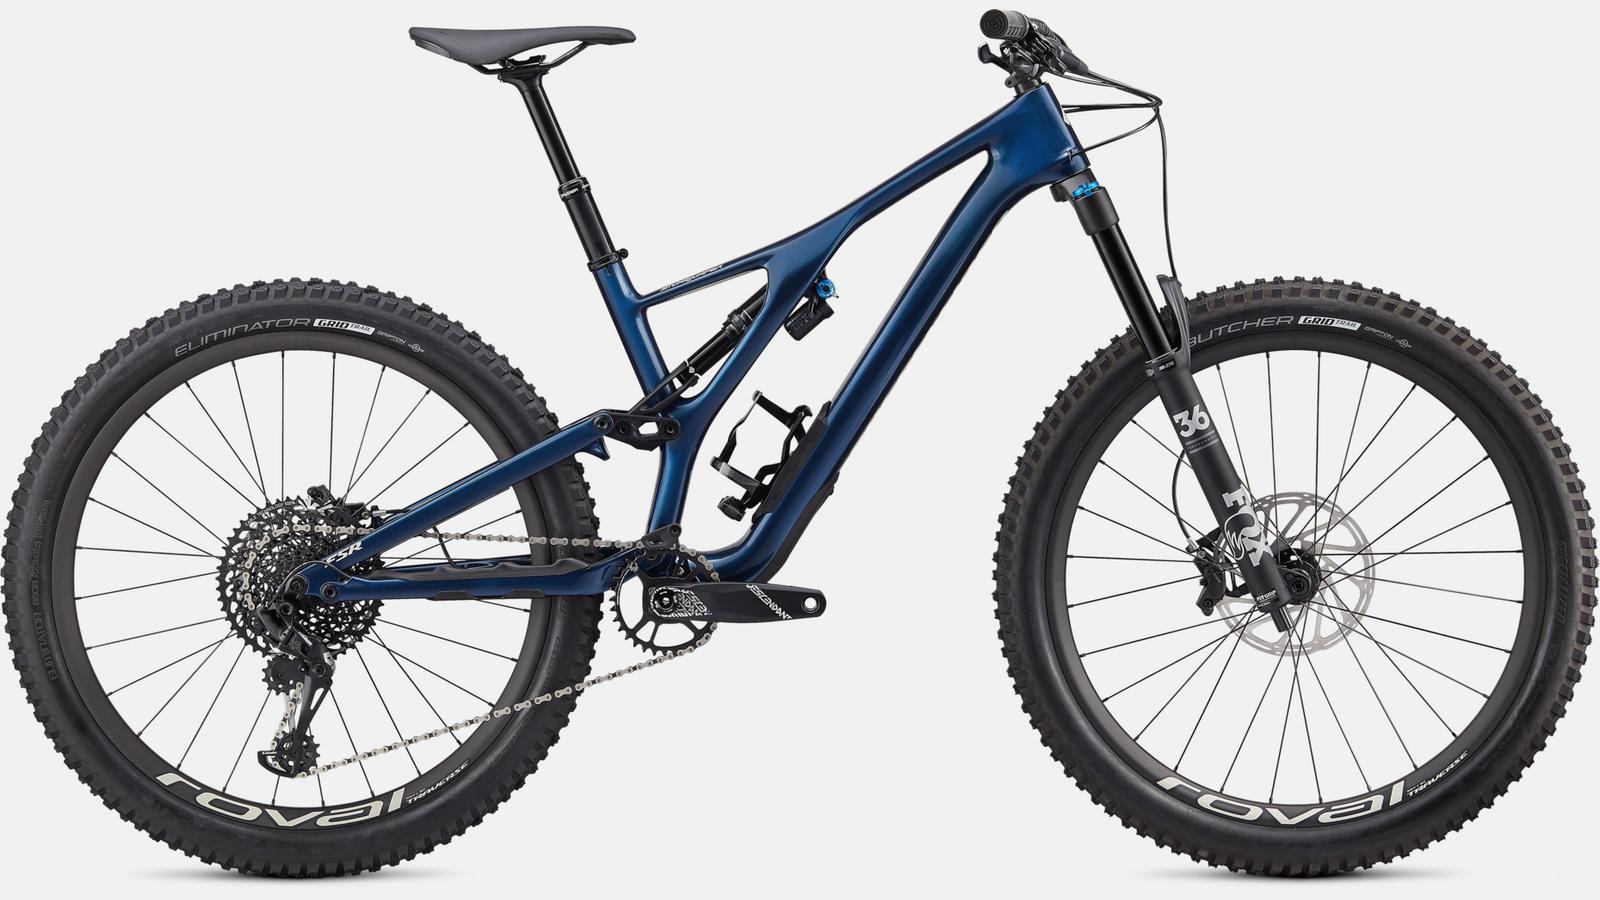 Paint for 2020 Specialized Stumpjumper Expert Carbon 27.5 - Gloss Navy